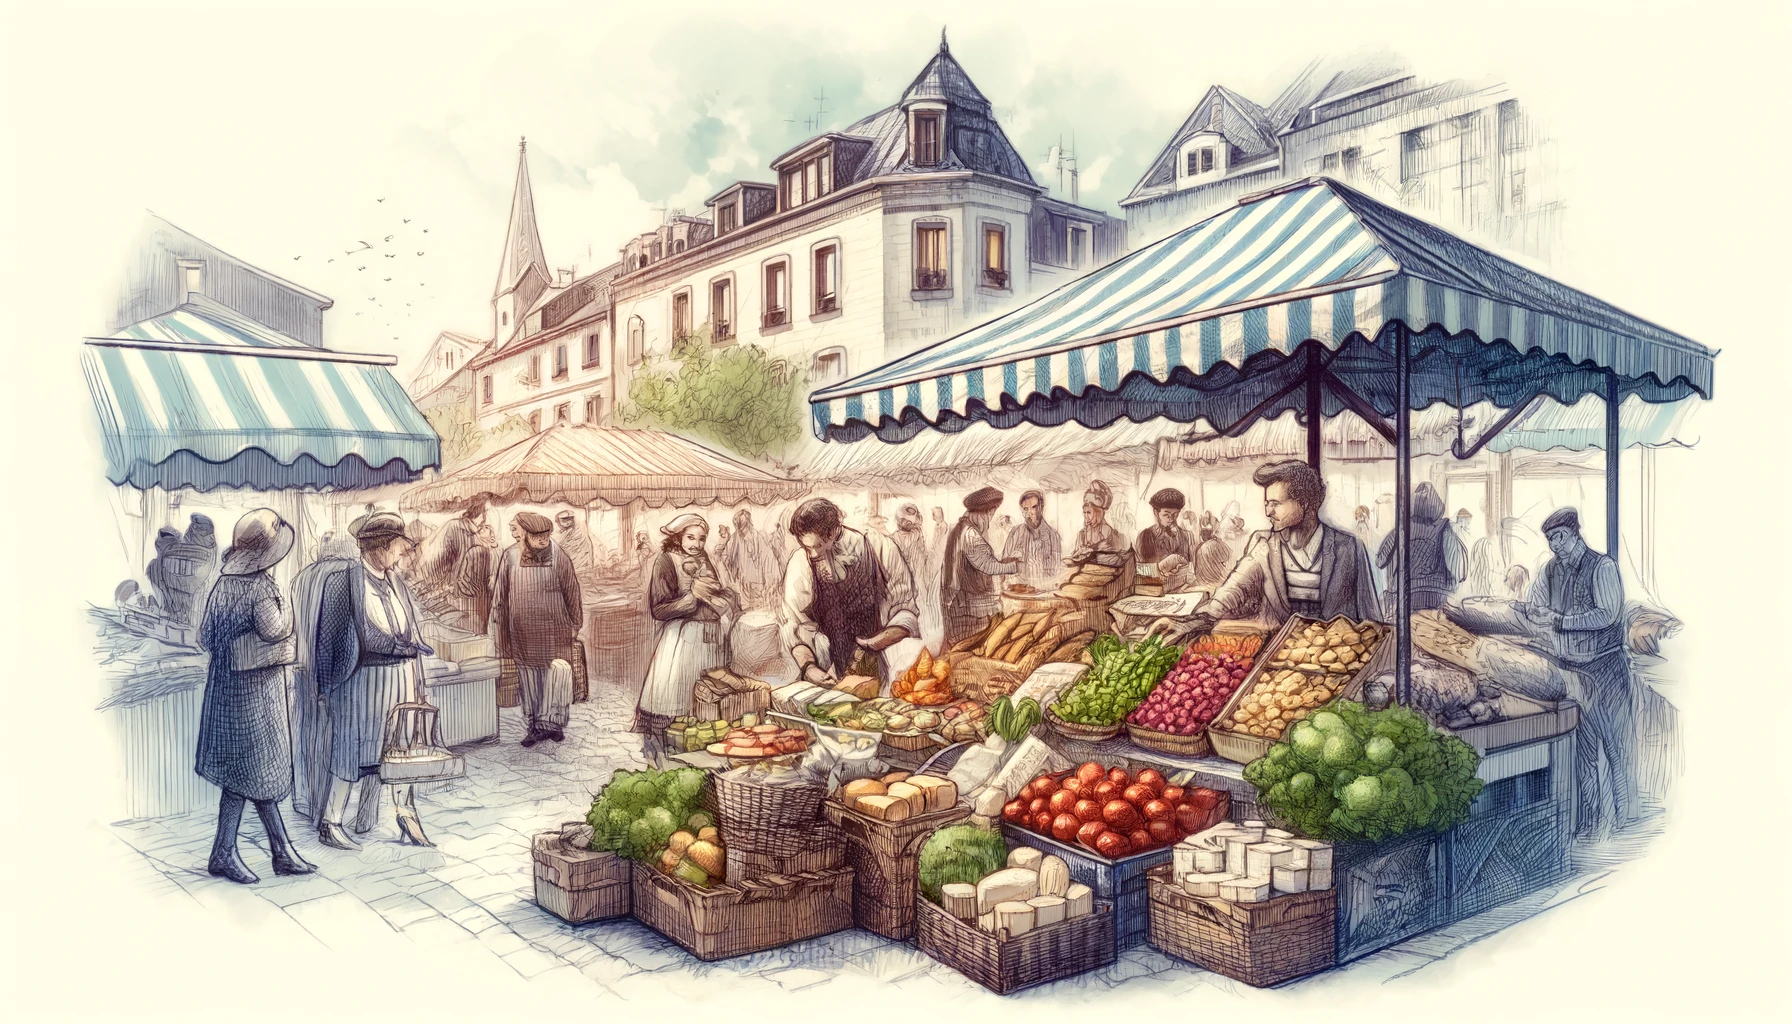 Vibrant sketch of a bustling French market scene with vendors and shoppers interacting over fresh produce, seafood, and cheeses, capturing the communal enjoyment and regional nuances of French culinary traditions.